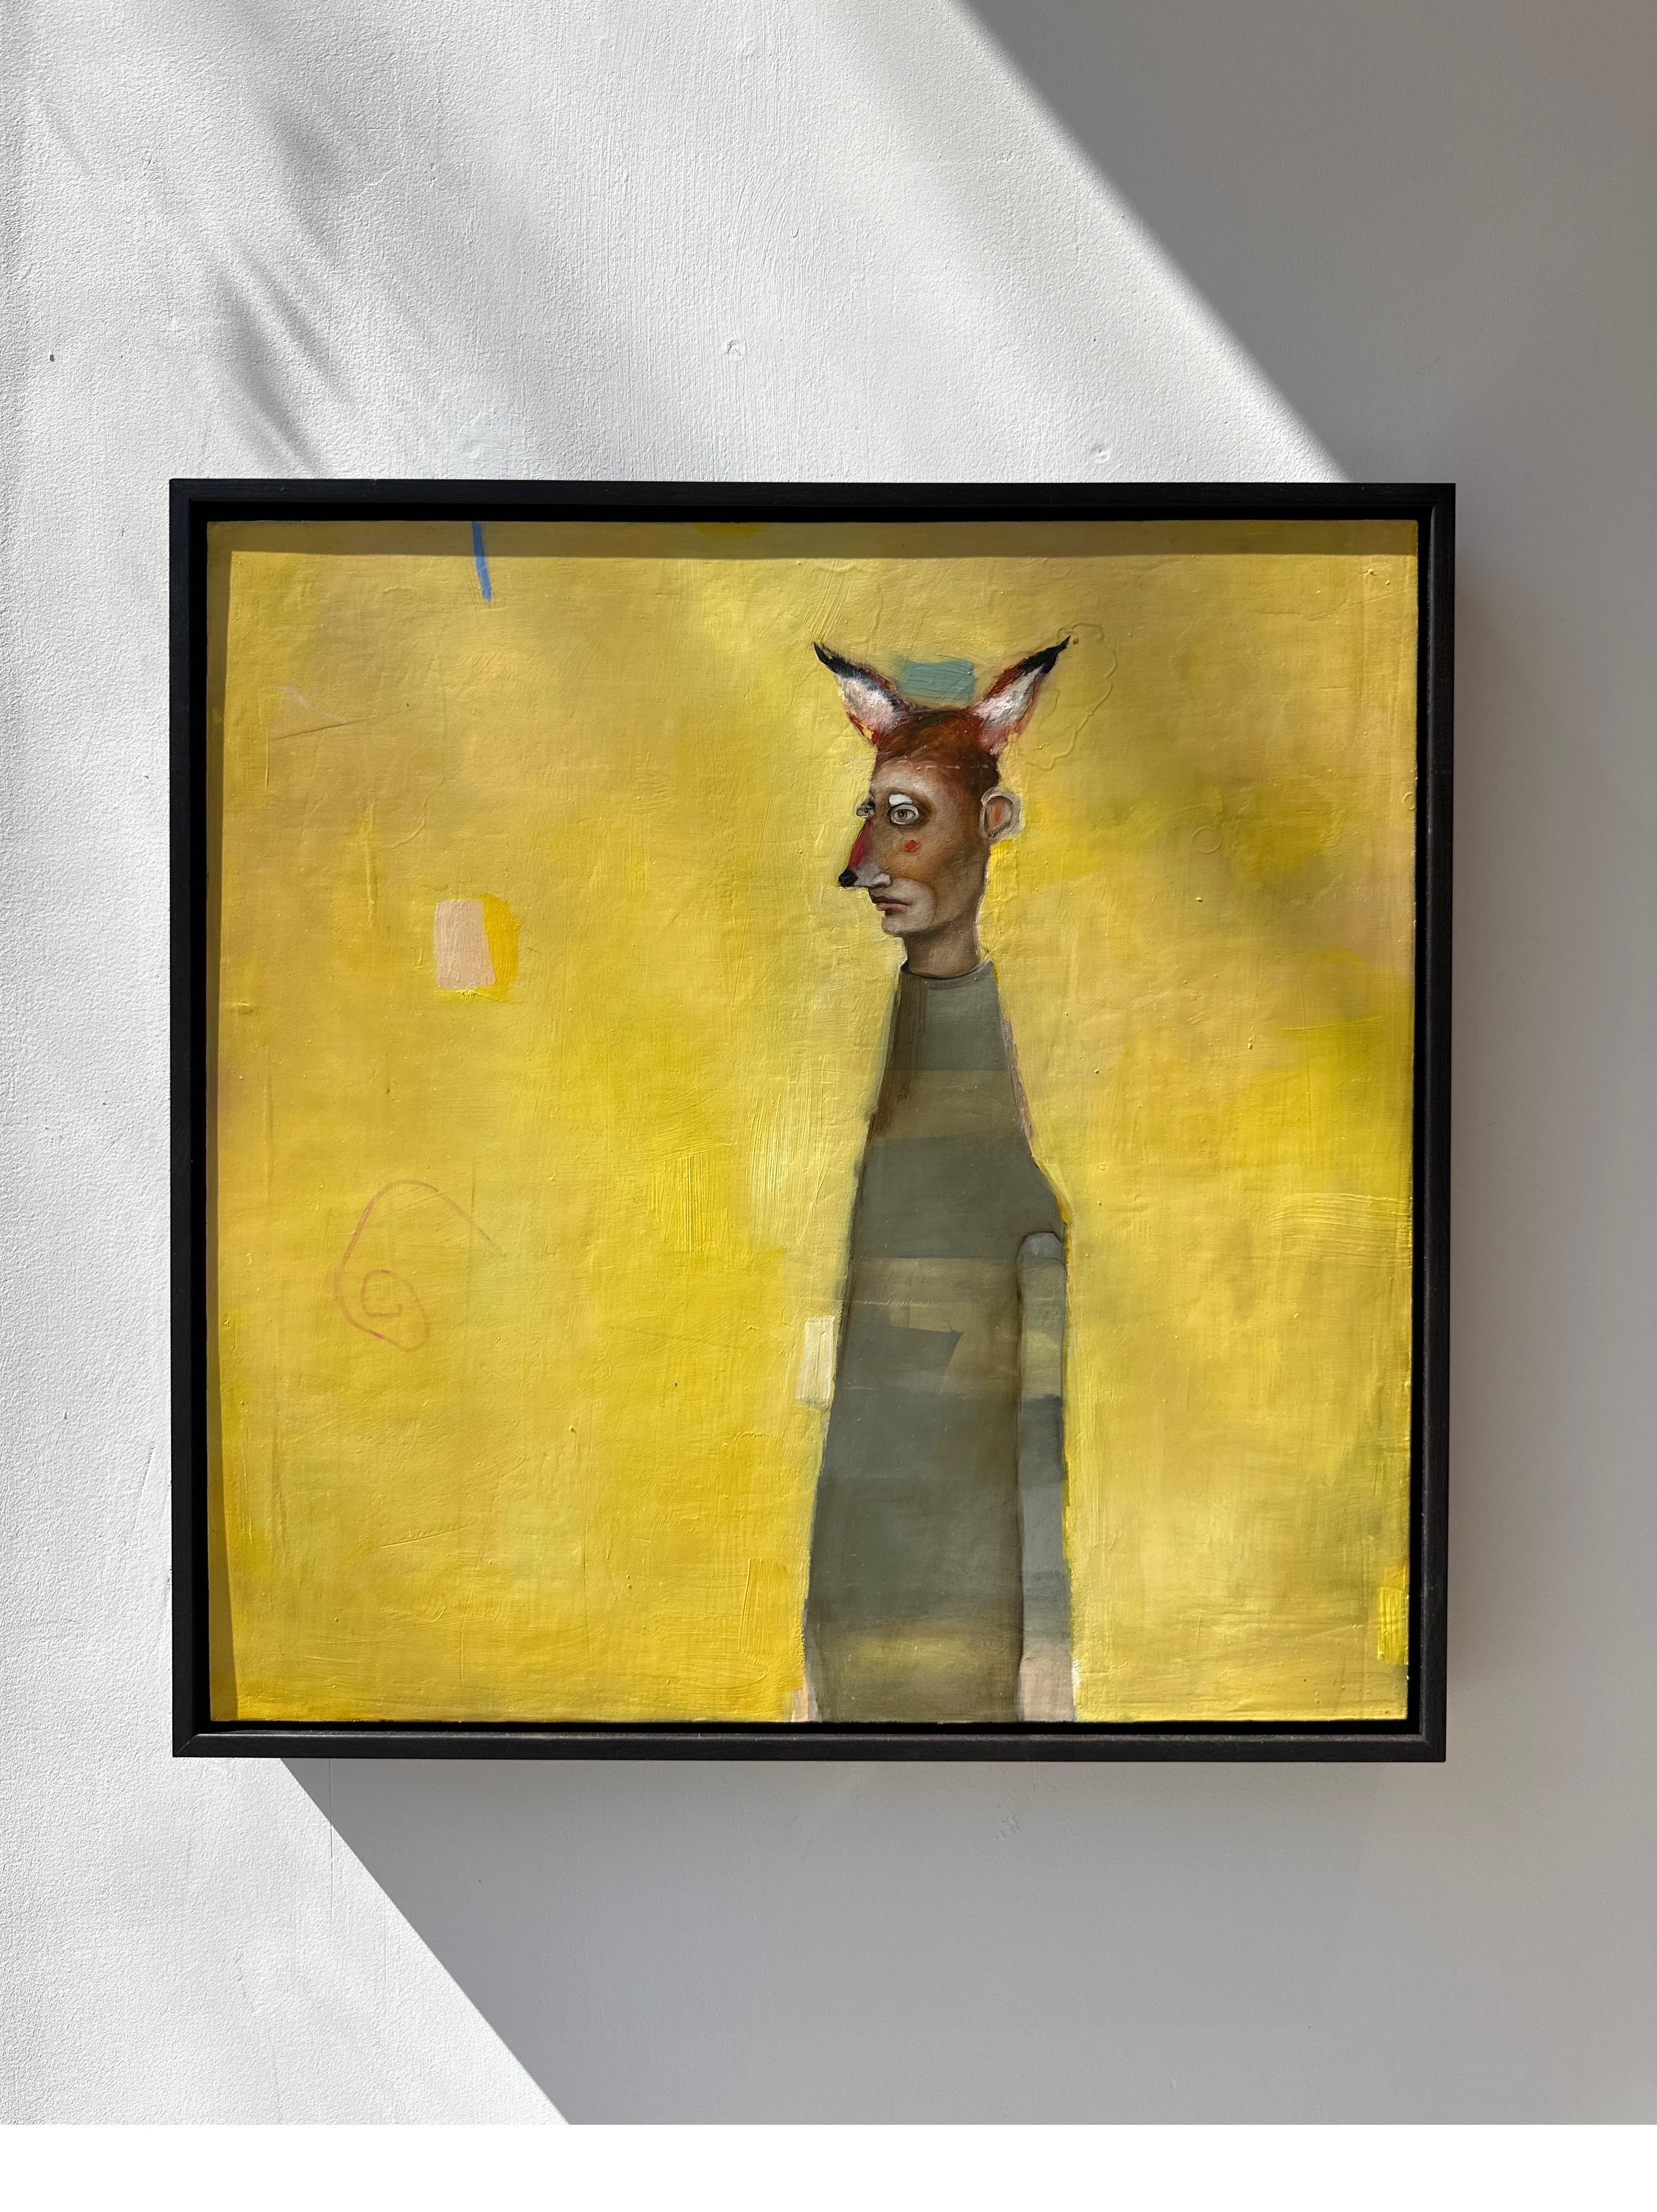 Muddy Fox, Oil on canvas, figurative pop art portrait with yellow background - Painting by Michele Mikesell